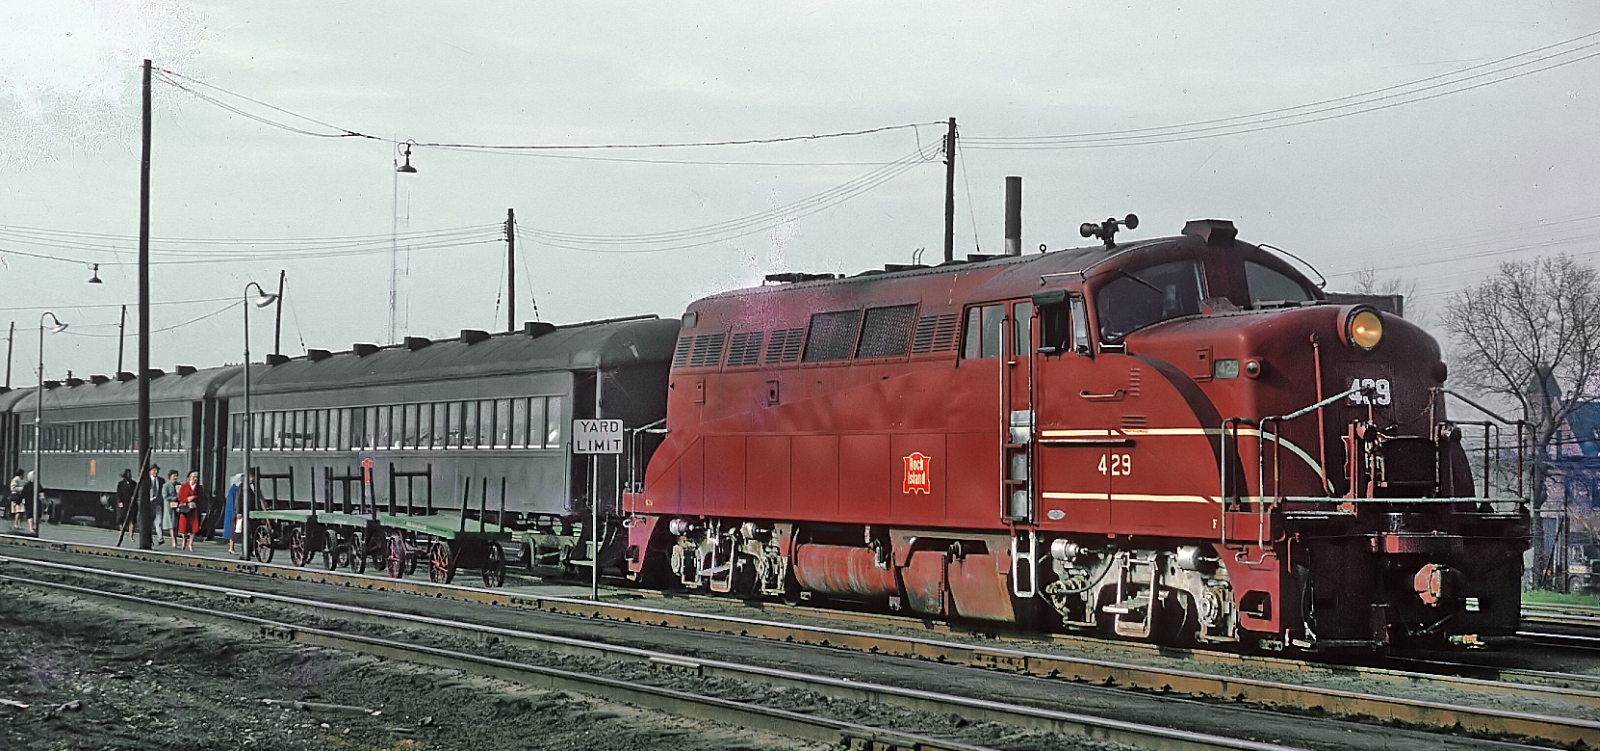 BL2 of the Chicago, Rock Island and Pacific Railroad in April 1965 at Englewood Union Station in Chicago